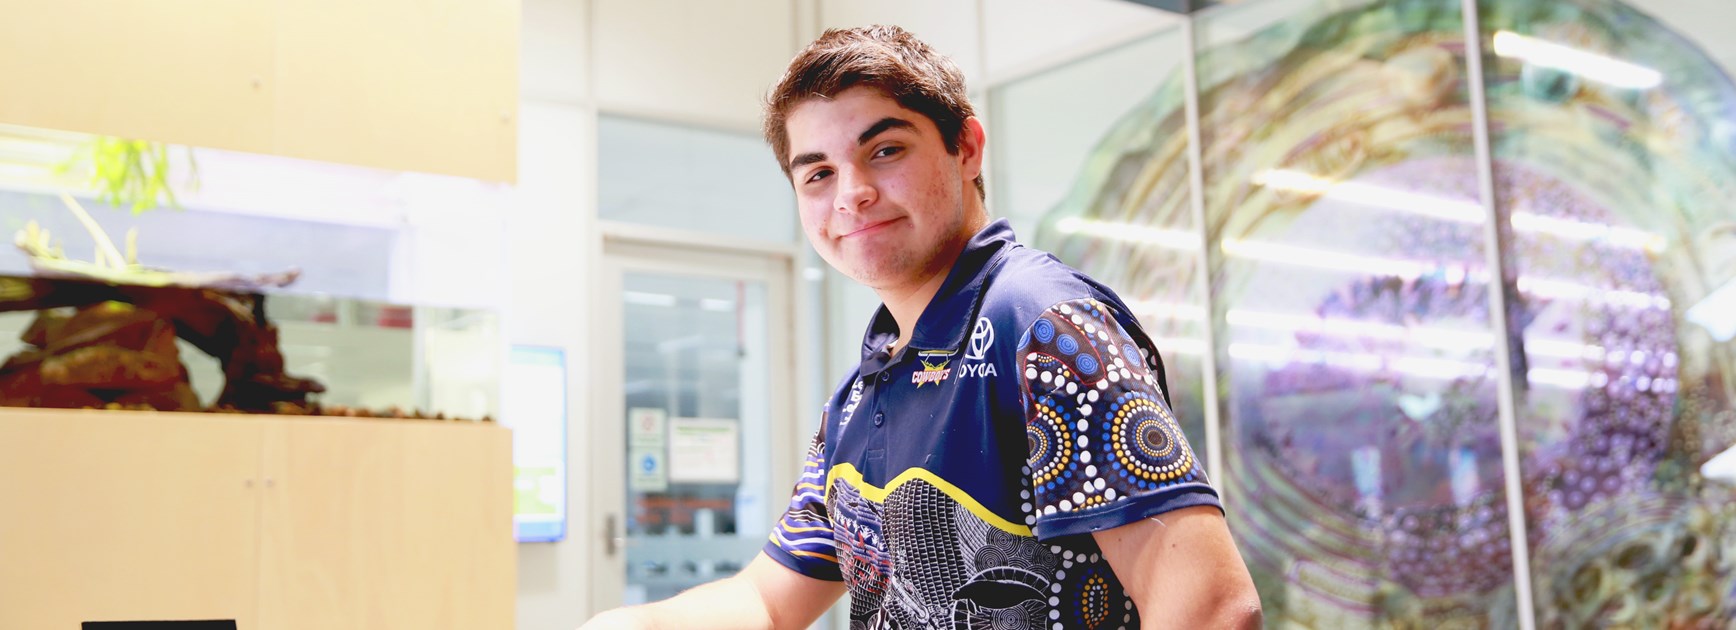 Path to success for young Indigenous man